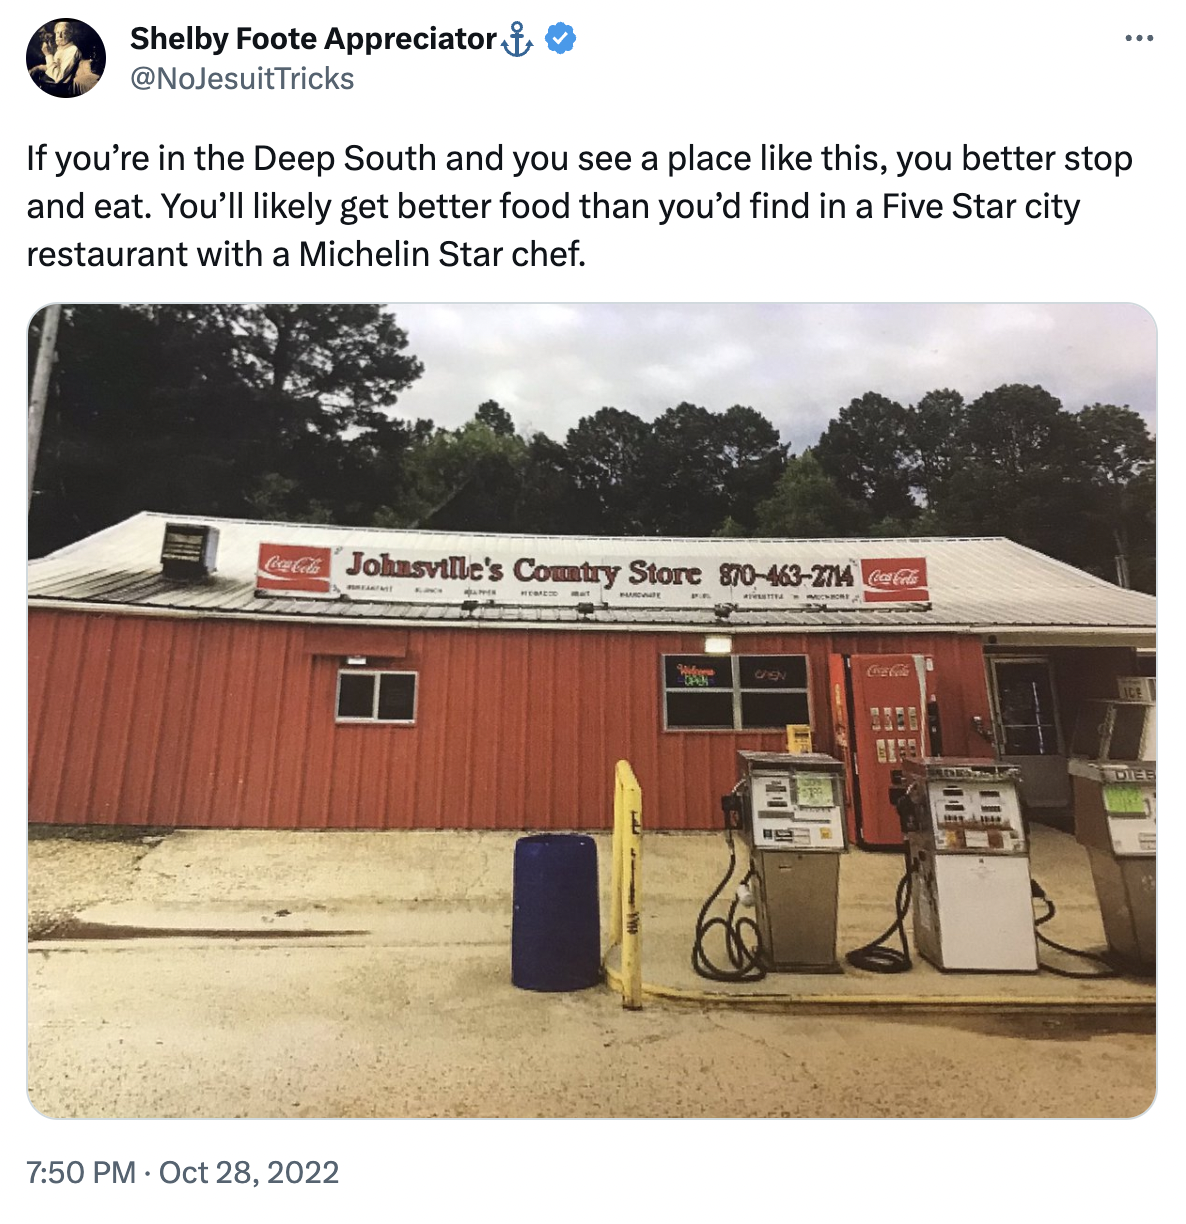 real estate - Shelby Foote Appreciator If you're in the Deep South and you see a place this, you better stop and eat. You'll ly get better food than you'd find in a Five Star city restaurant with a Michelin Star chef.\